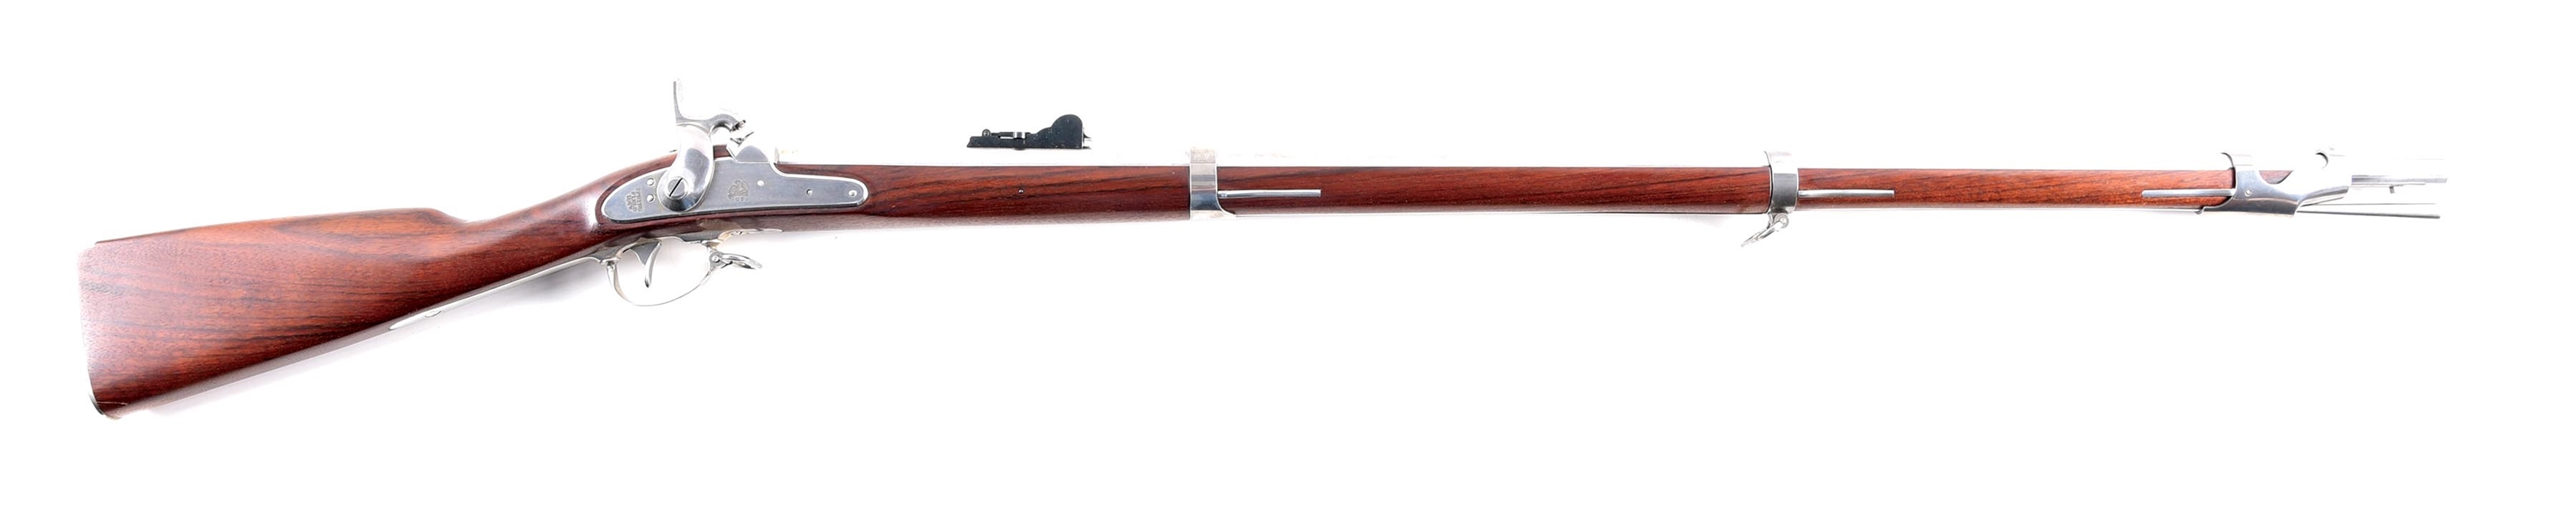 (A) ARMI SPORT REPRODUCTION OF A SPRINGFIELD MODEL 1847 PERCUSSION RIFLE WITH ACCESSORIES.